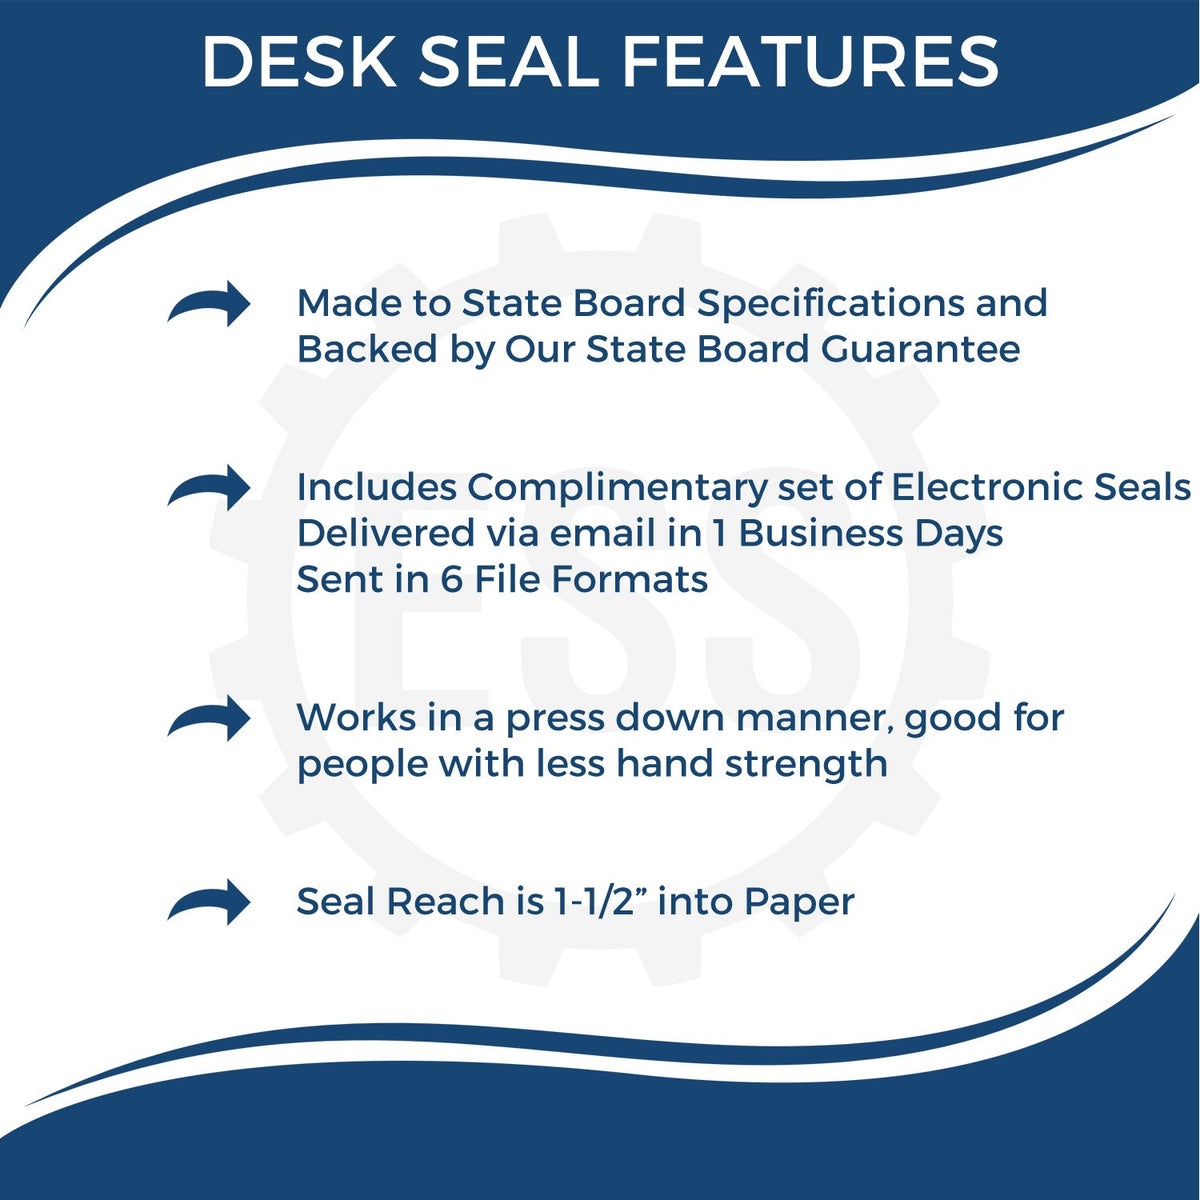 A picture of an infographic highlighting the selling points for the Indiana Engineer Desk Seal